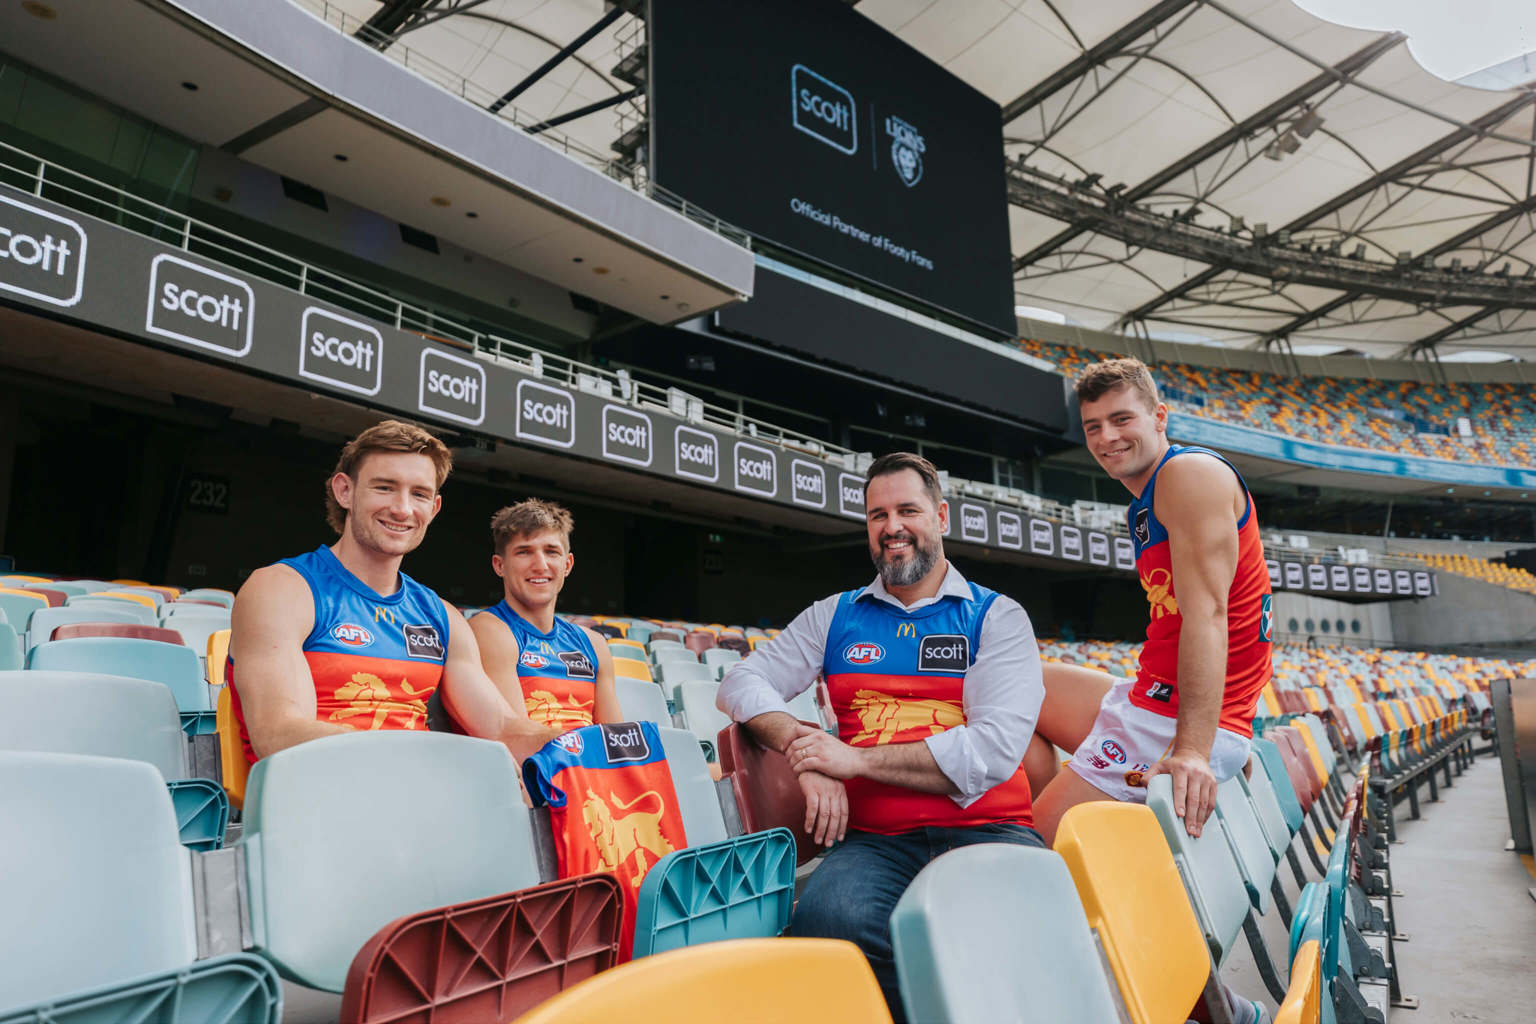 Lions sitting with Scottie at the Gabba